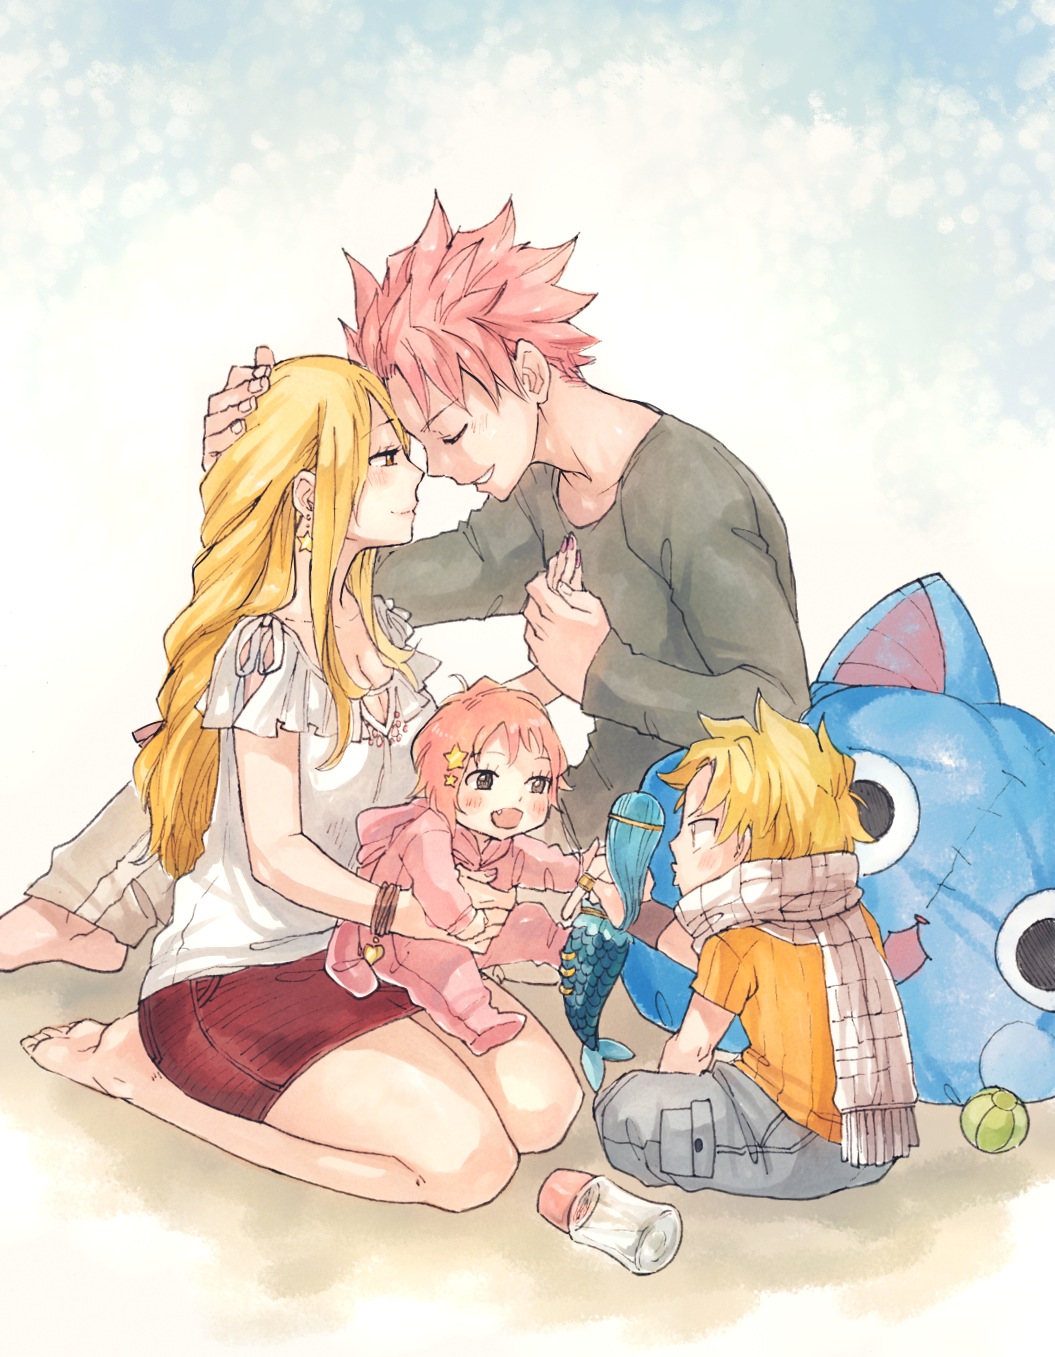 aquarius barefoot blonde blush brown_eyes child couple doll fairy_tail fang feet group hair_ornament hairpin happy high_resolution jewelry long_hair lucy_heartfilia nail_polish natsu_dragneel pants pillow pink_hair rusky scarf short_hair skirt smile stars